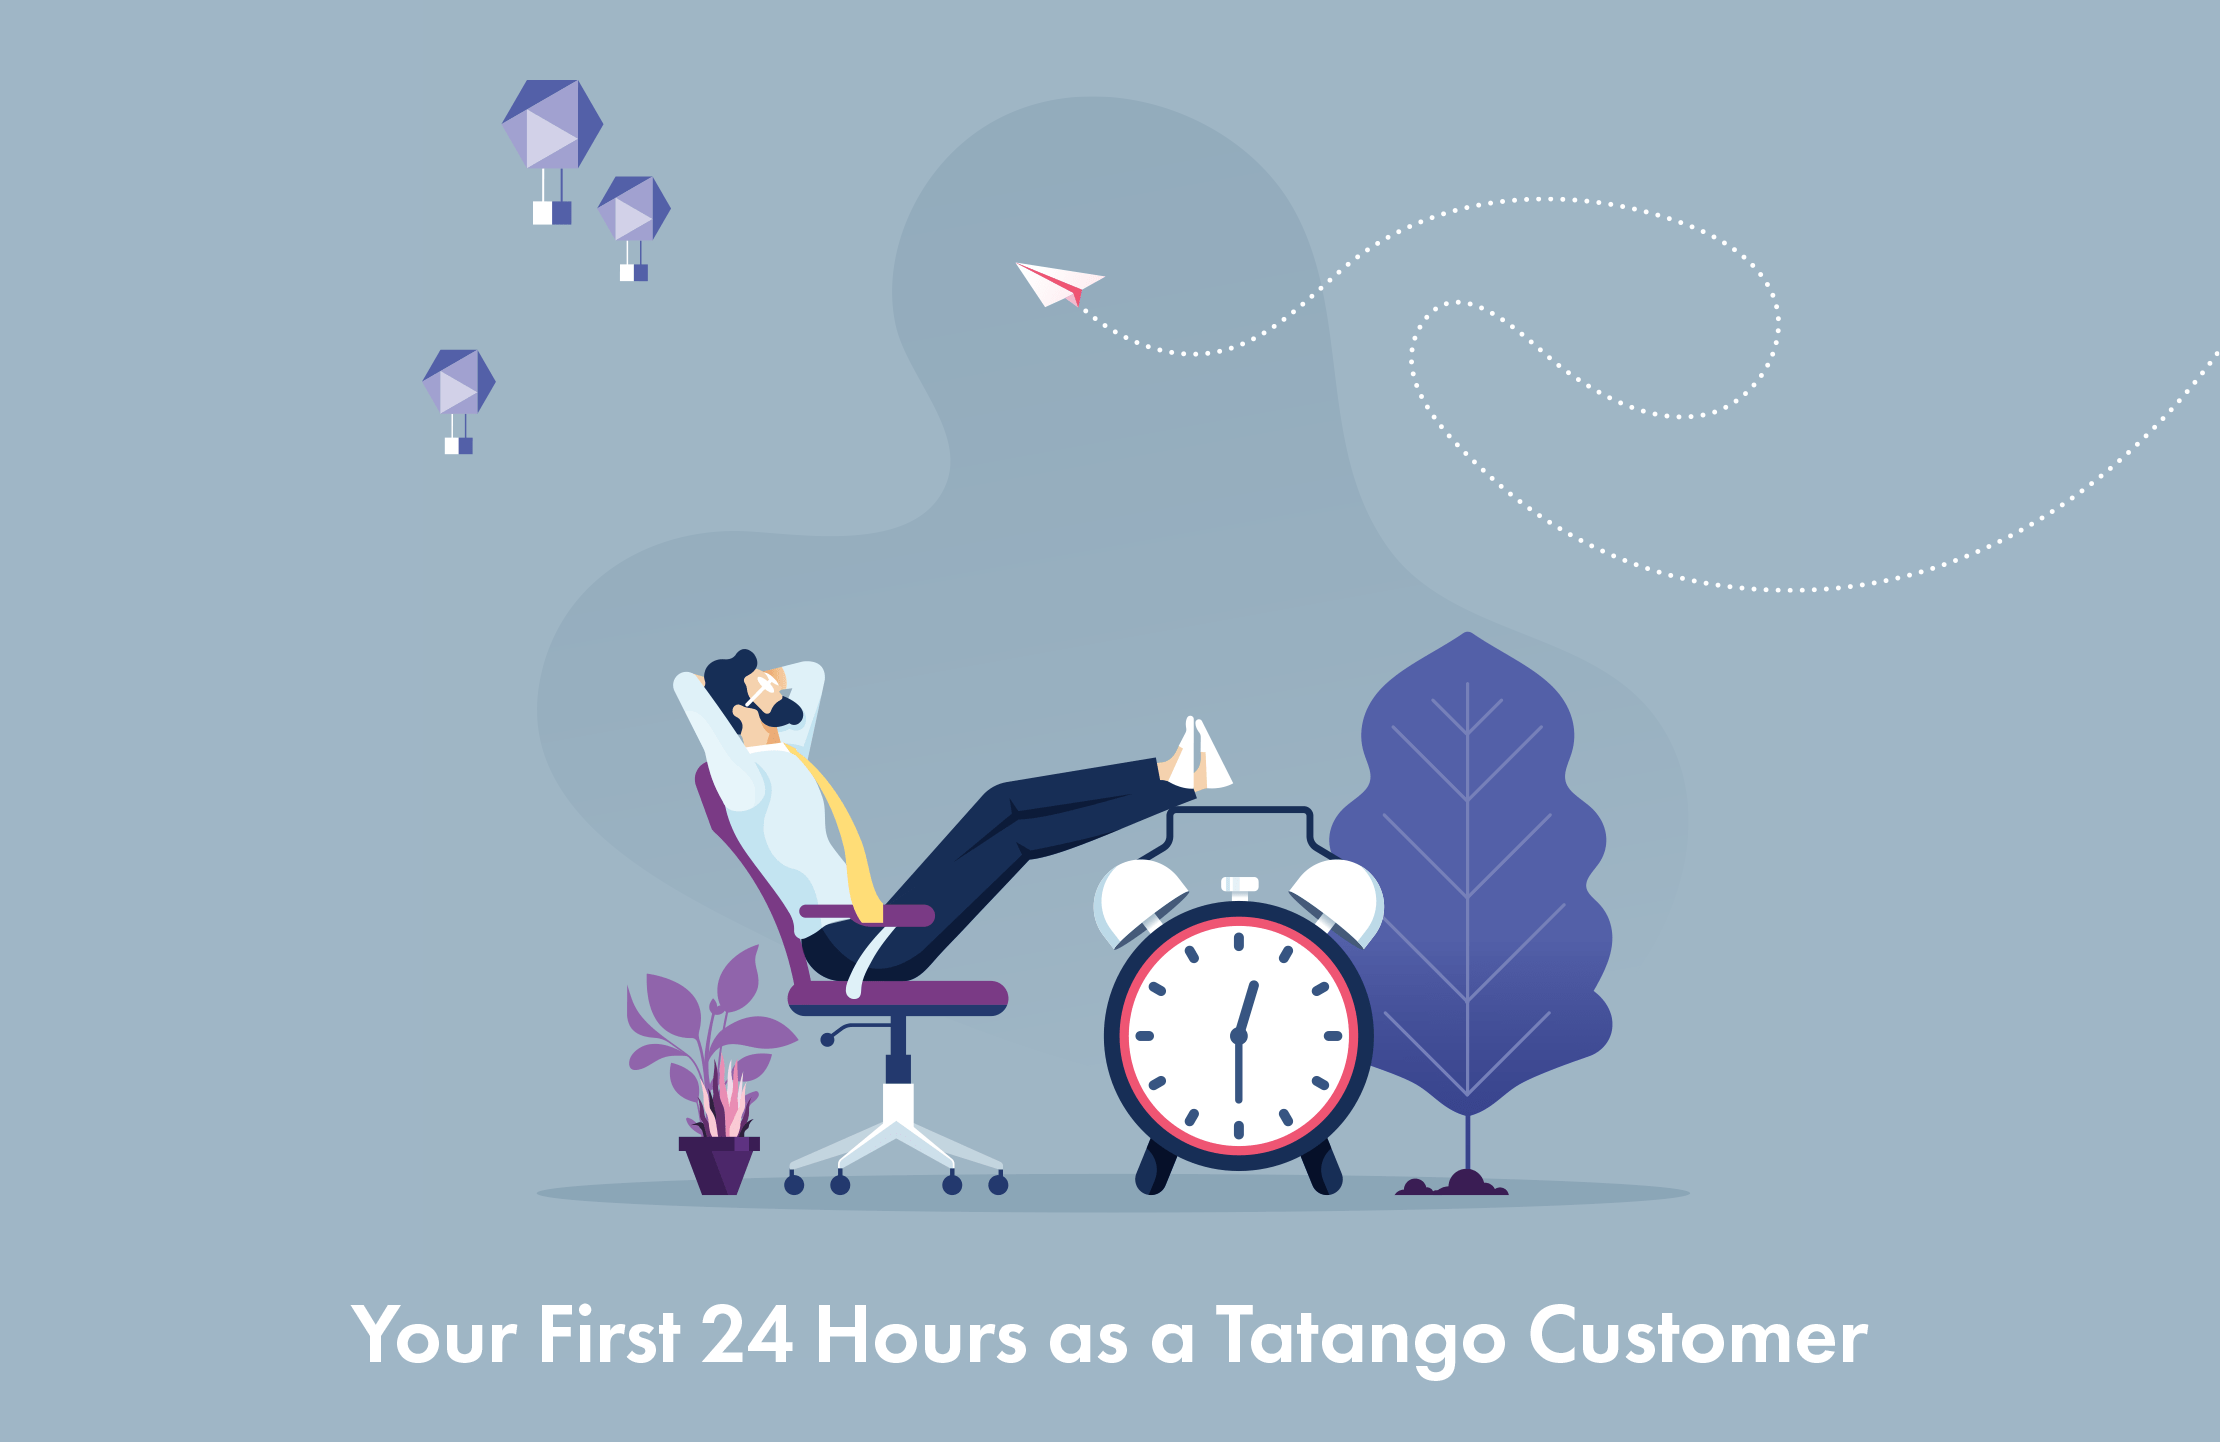 Your First 24 Hours as a Tatango Customer